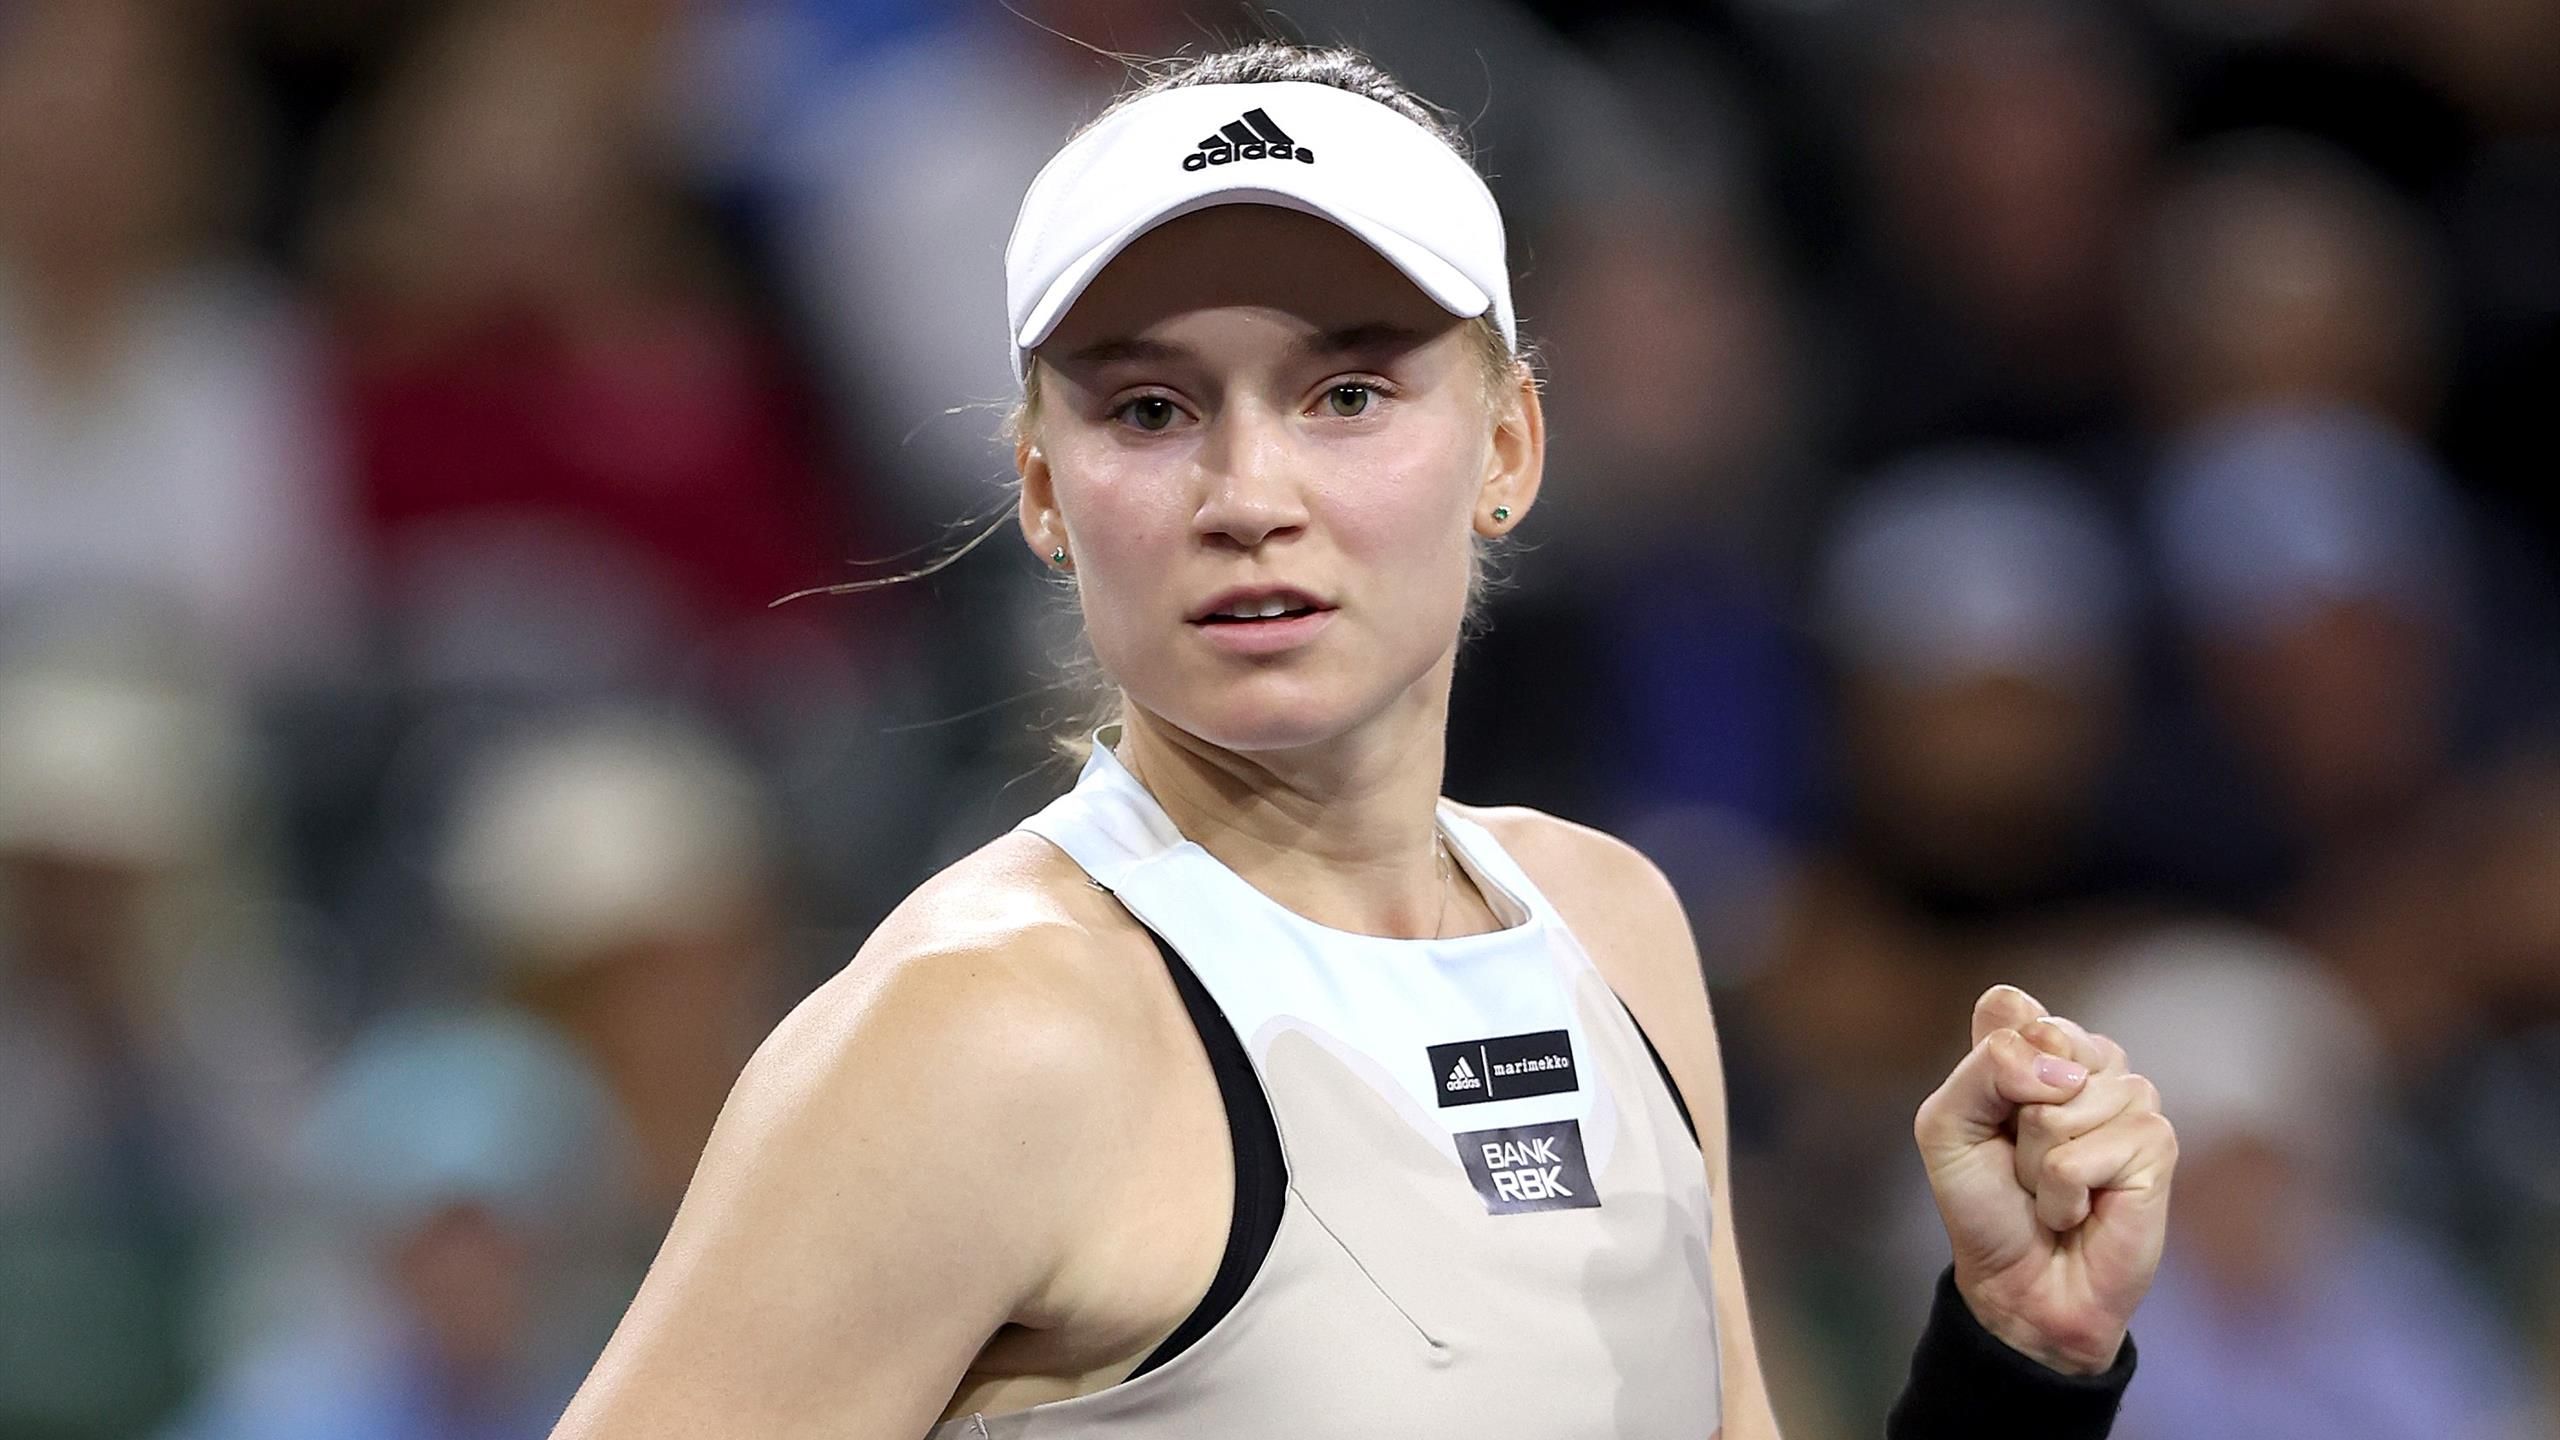 Elena Rybakina - An impressive record set ❤️❤️ Elena Rybakina becomes the  first player to defeat the world number one & two at BNP Paribas Open  #indianwells in the same year! 👑 📷 Eurosport